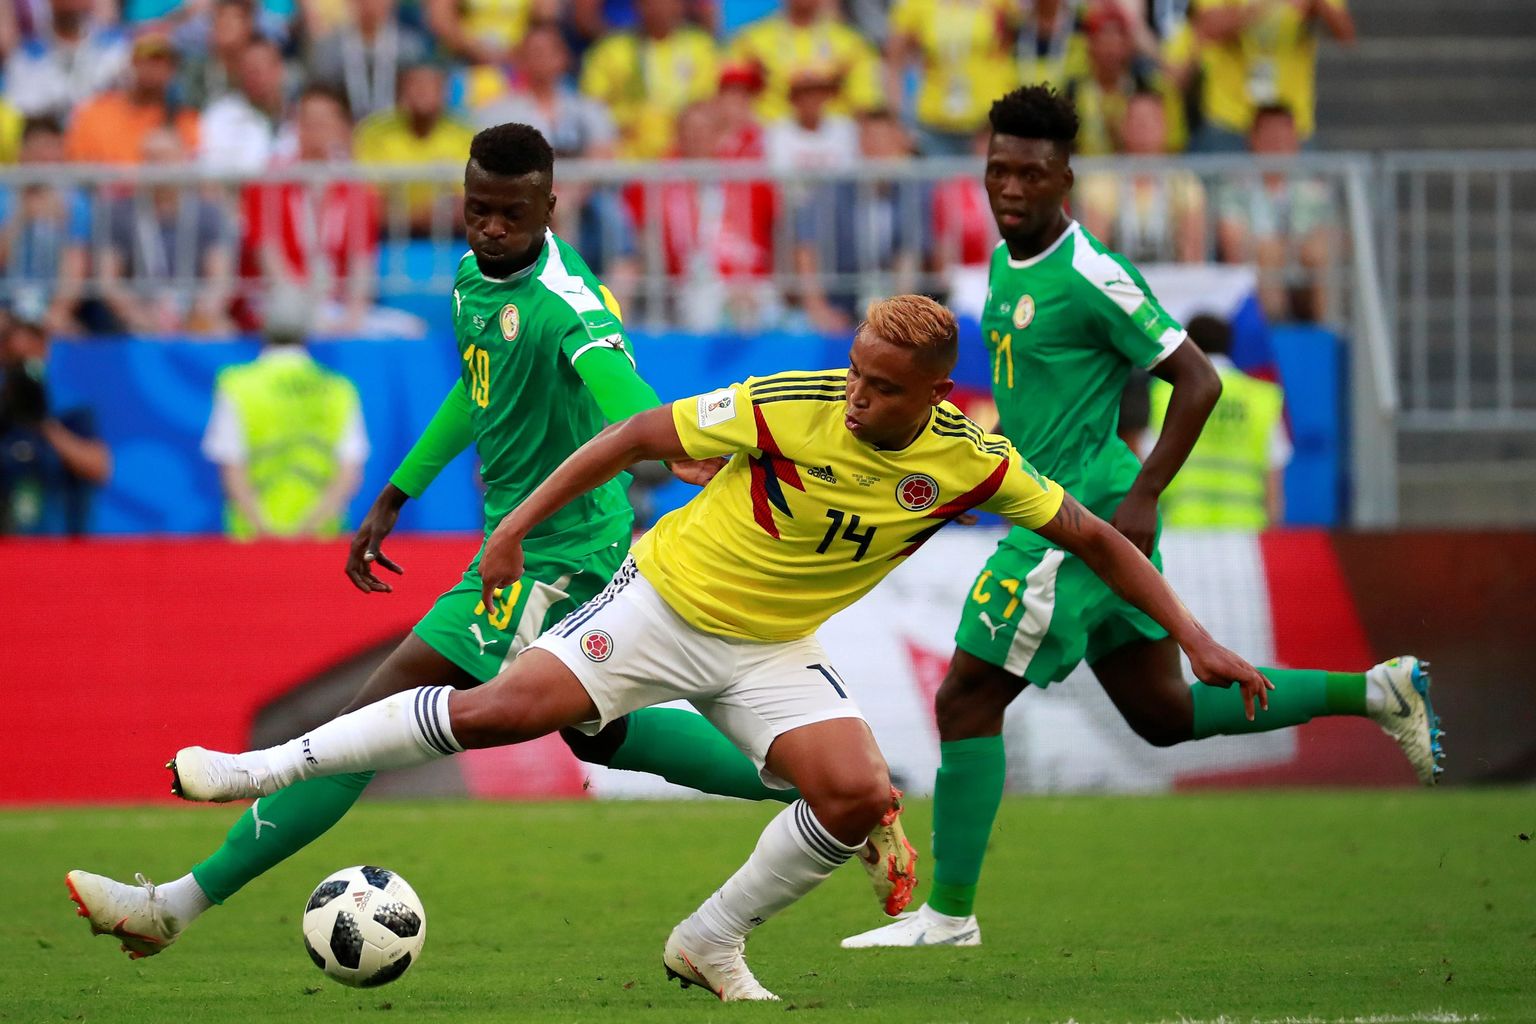 Muriel playing for Colombia against Senegal in the World Cup